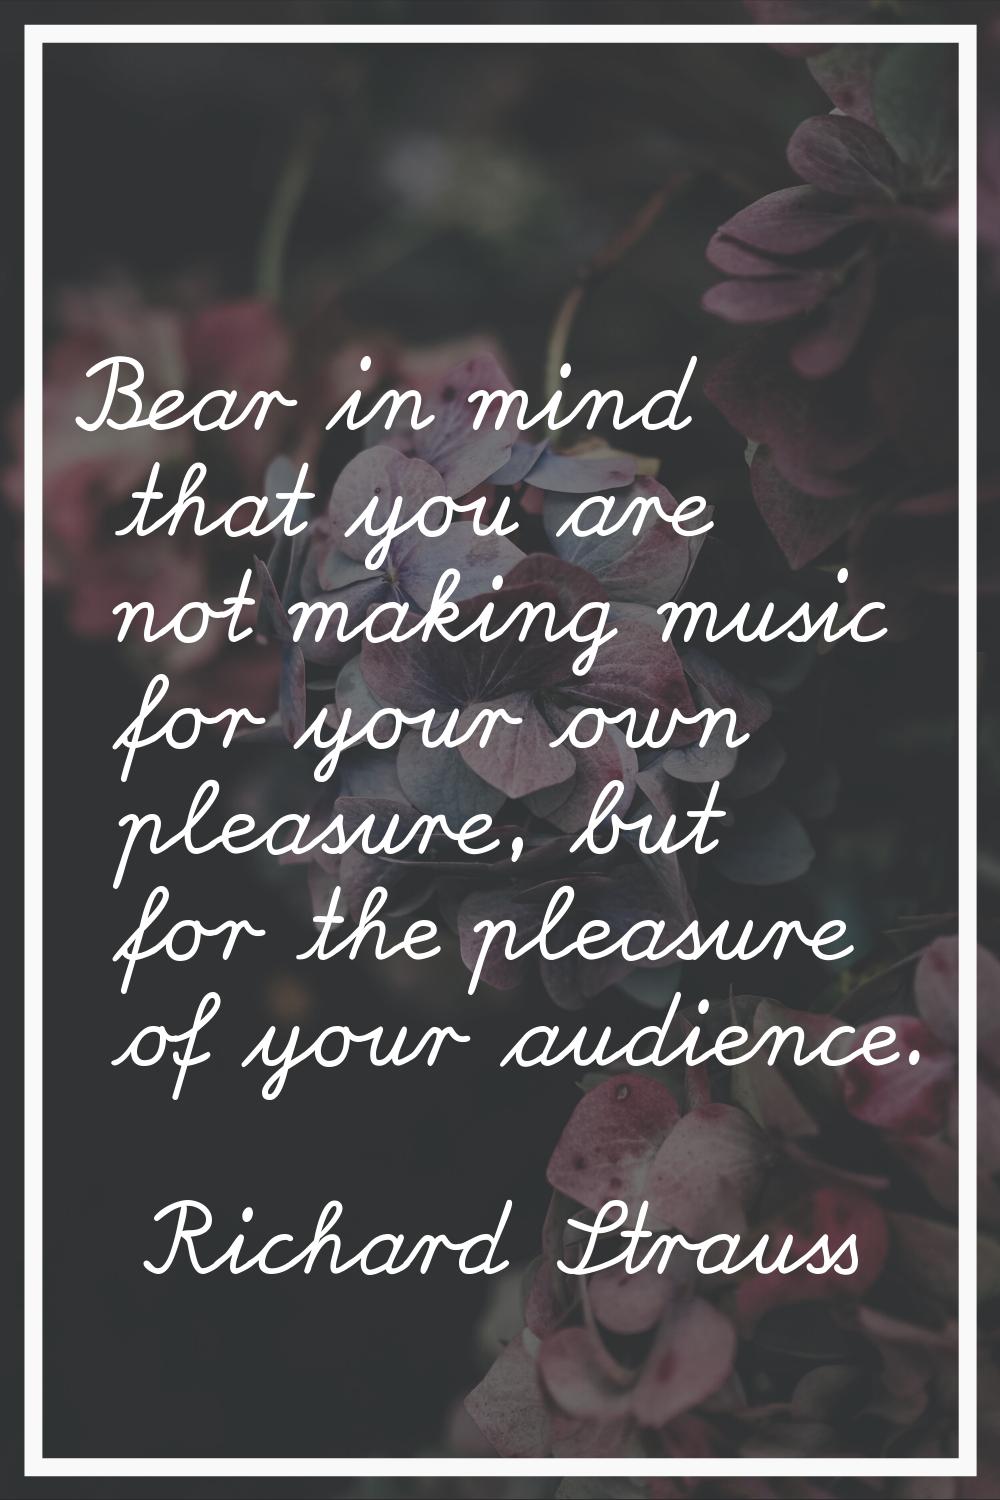 Bear in mind that you are not making music for your own pleasure, but for the pleasure of your audi